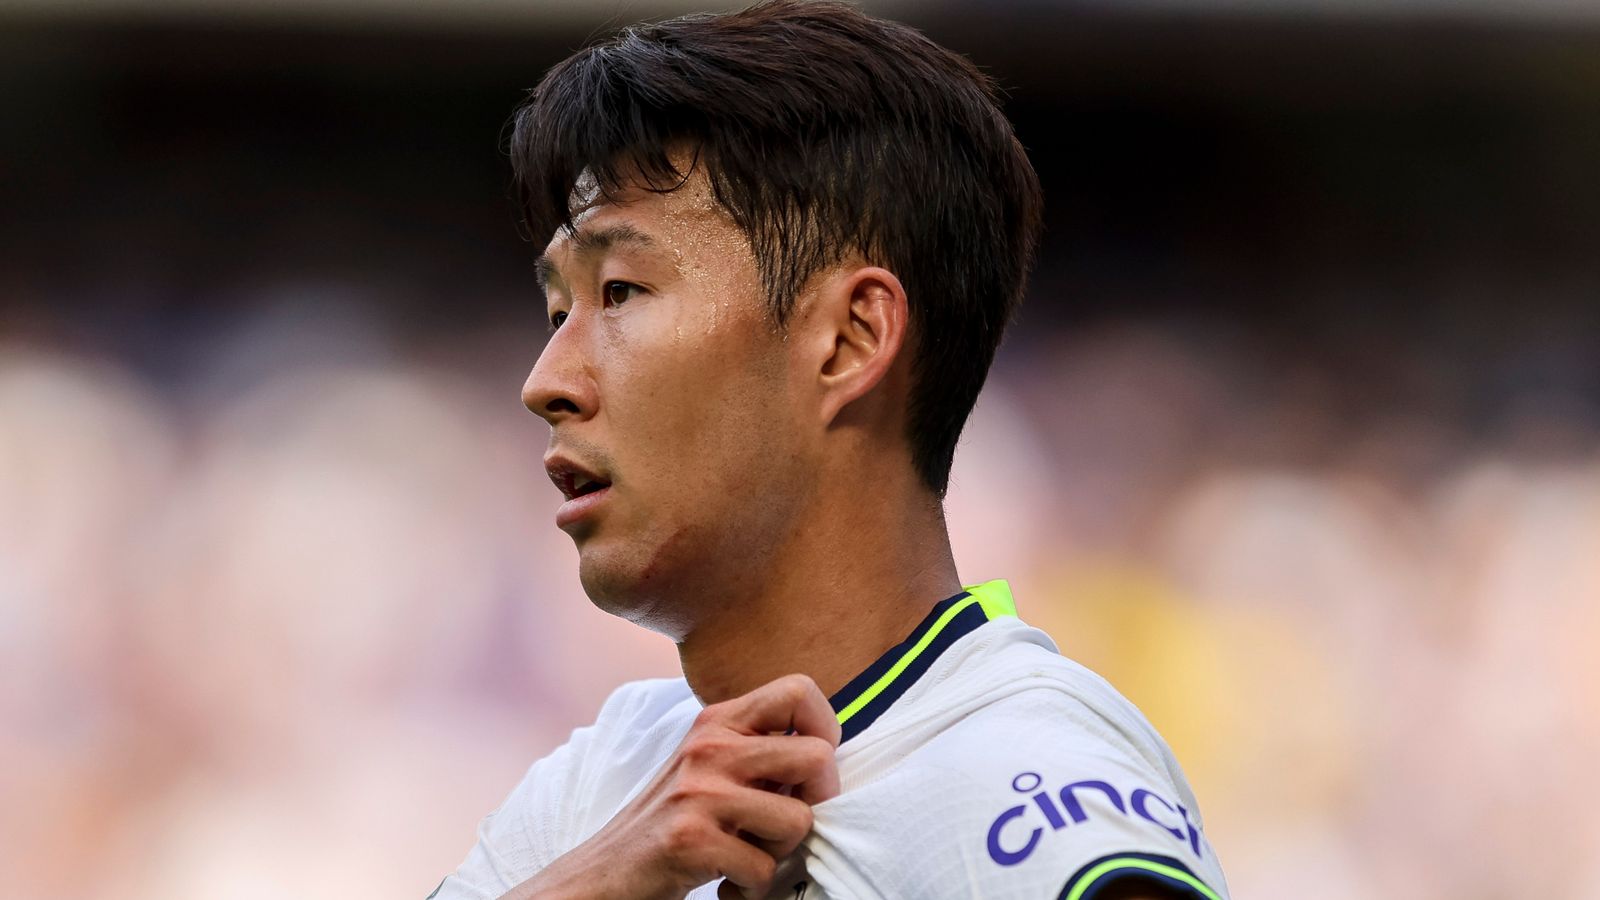 Man identified and under investigation after Tottenham’s Heung-Min Son allegedly racially abused at Stamford Bridge